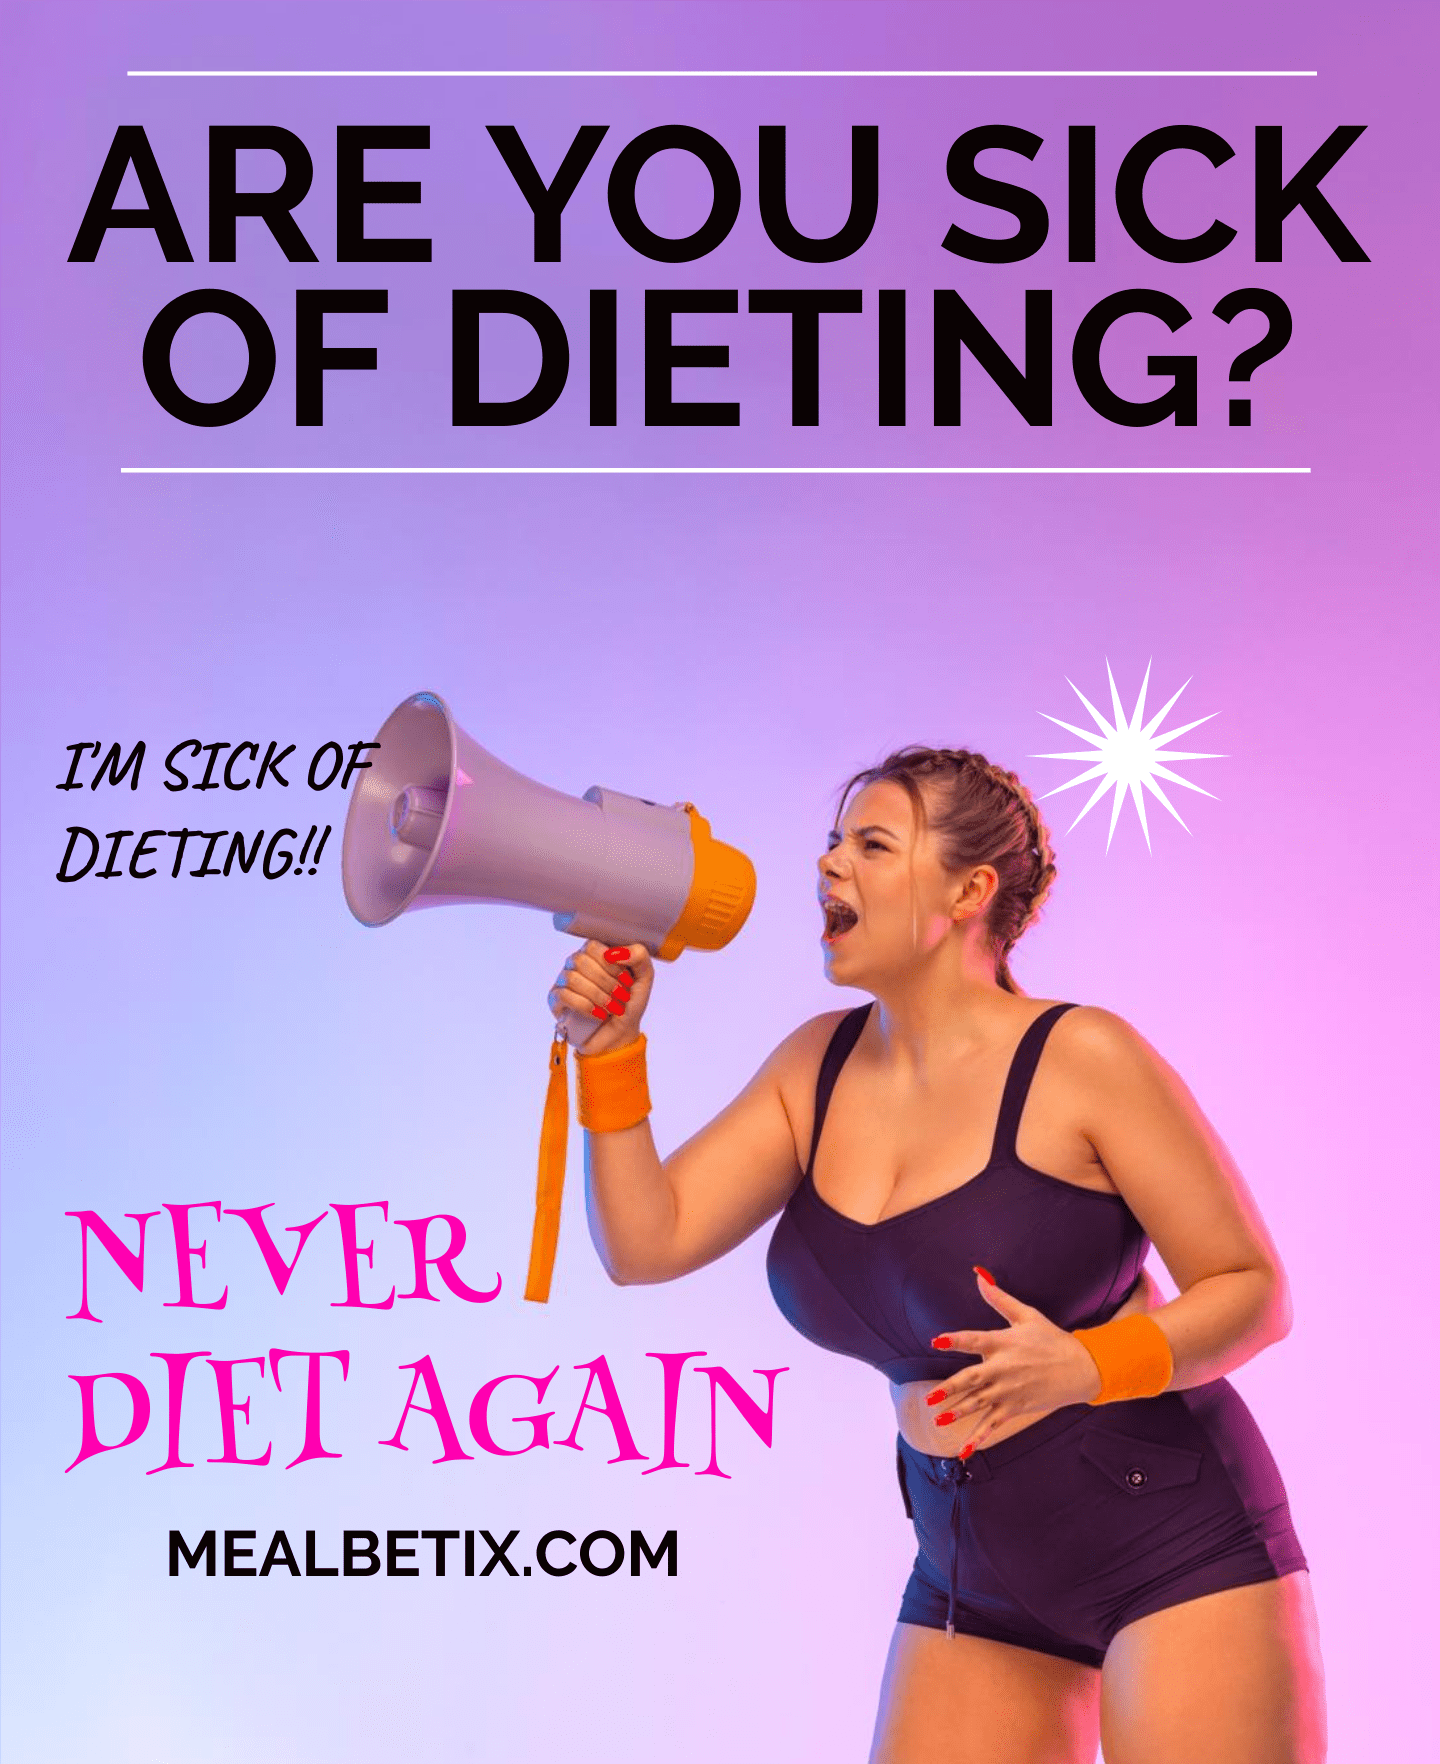 ARE YOU SICK OF DIETING?